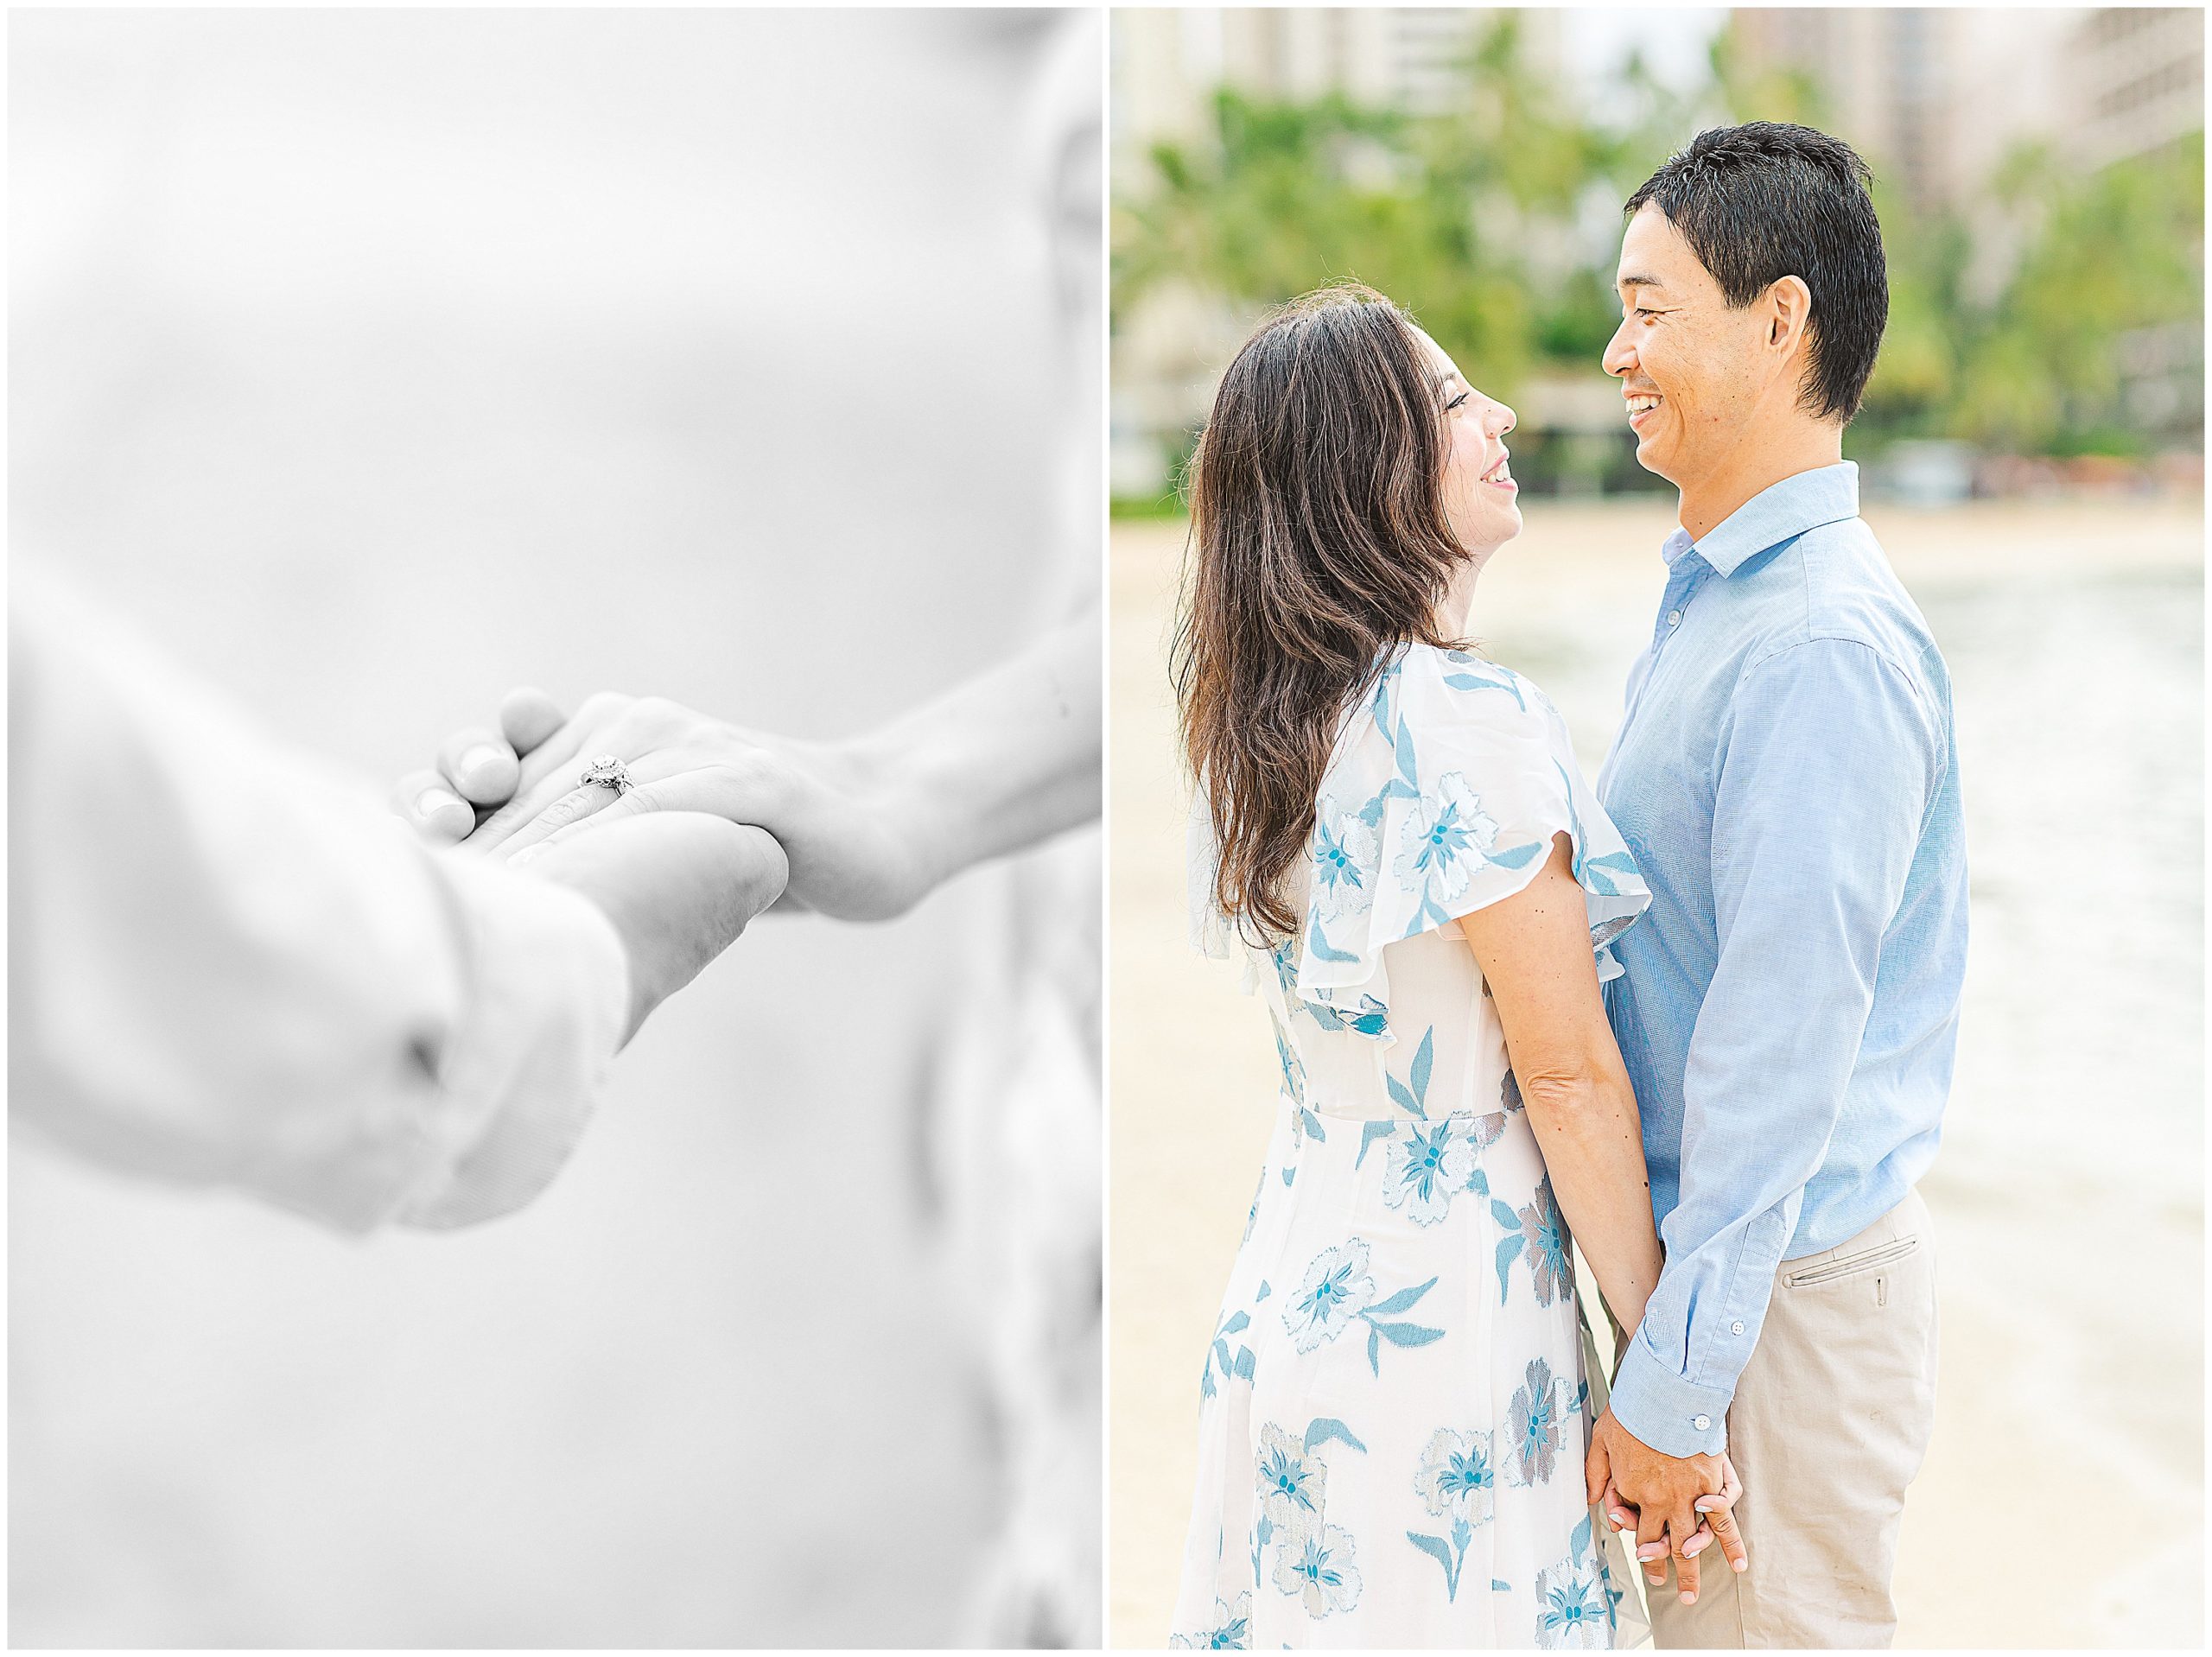 engagement photos on the beach in waikiki. the couple is holding hands in one image and the other has them laughing at eachother.